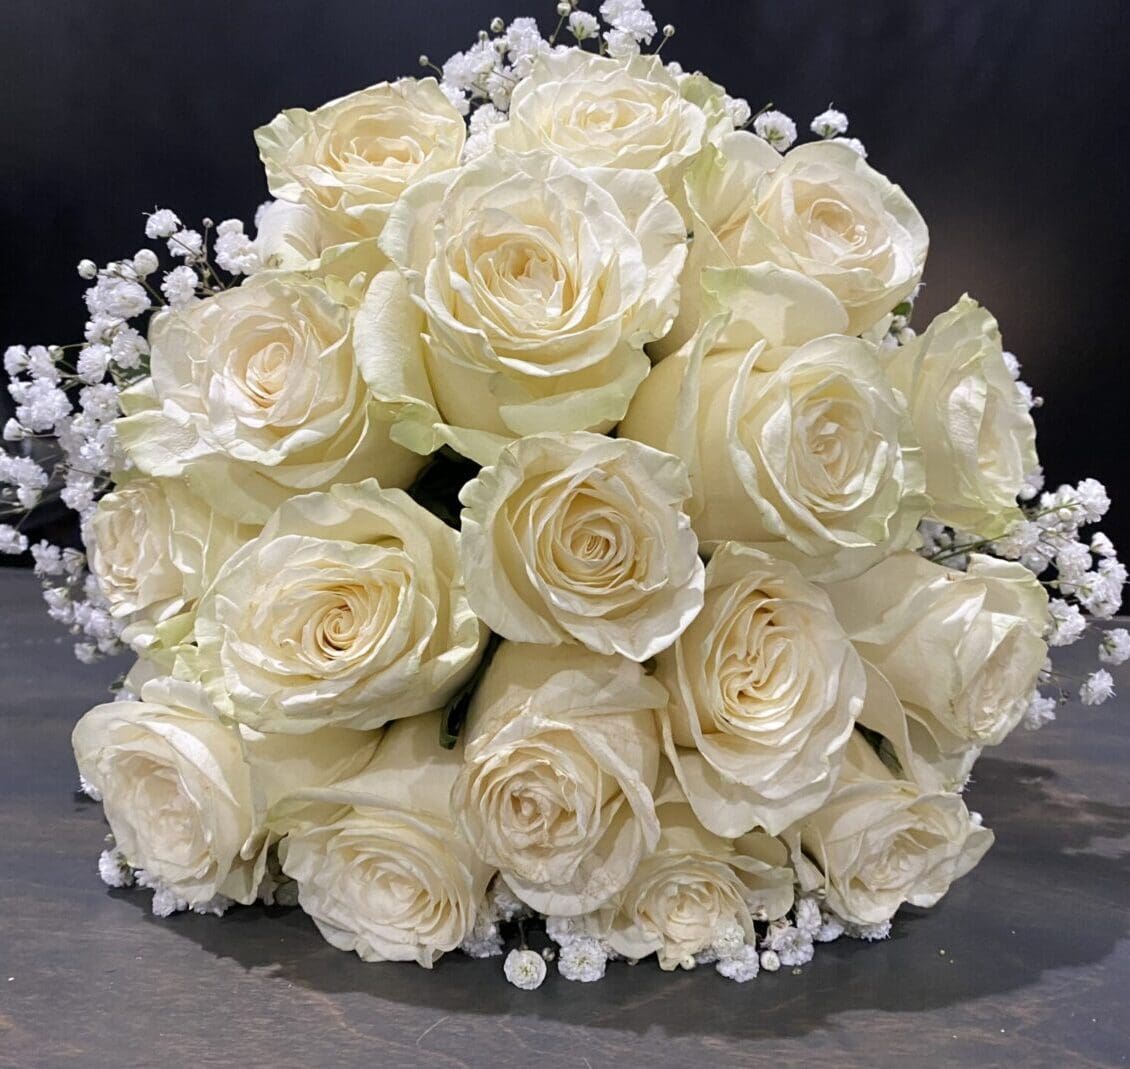 A bundle of white roses on a table